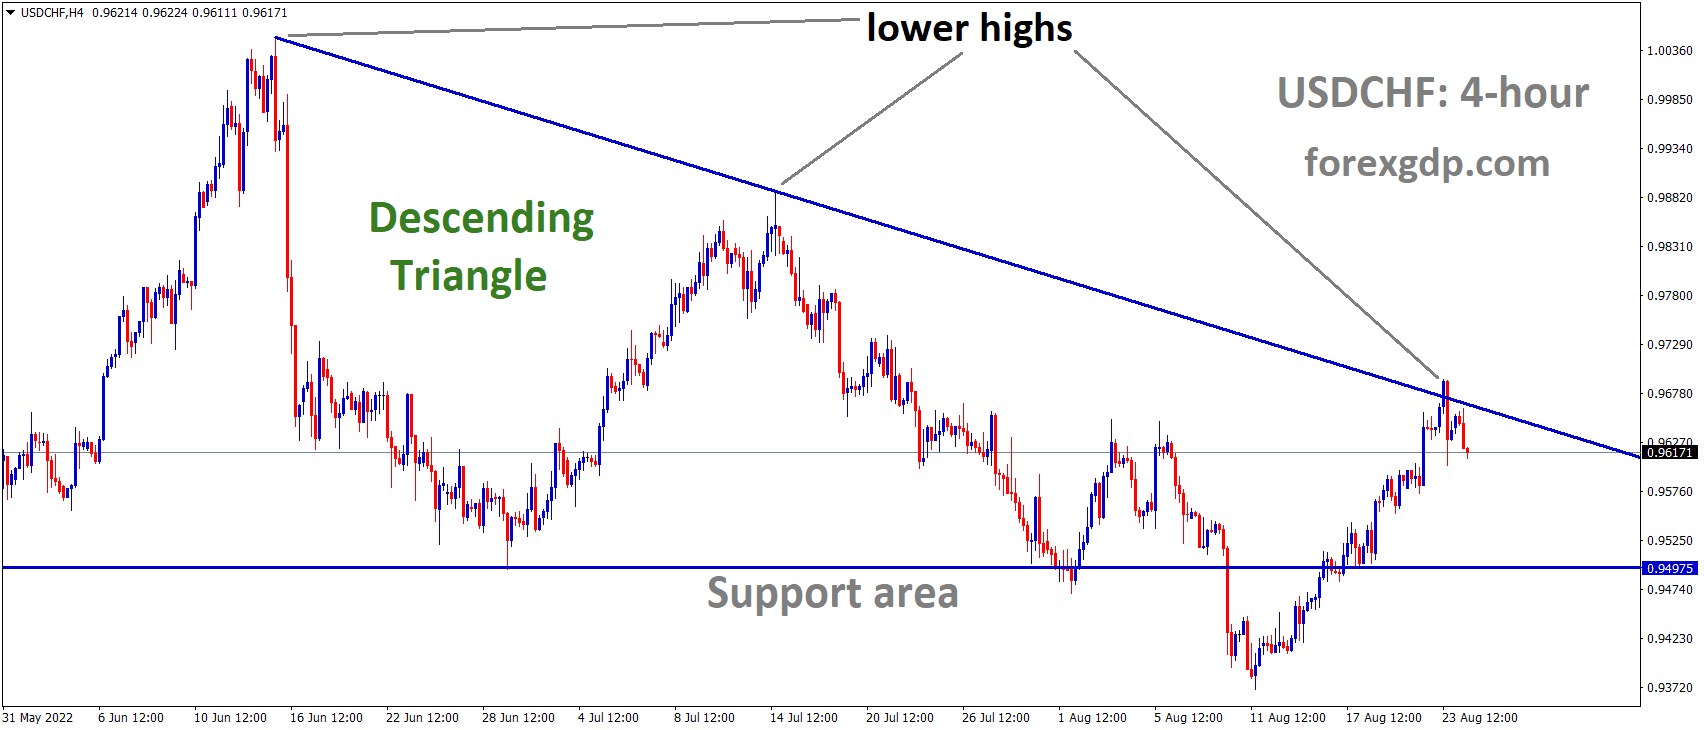 USDCHF is moving in the Descending triangle pattern and the market has fallen from the Lower high area of the pattern